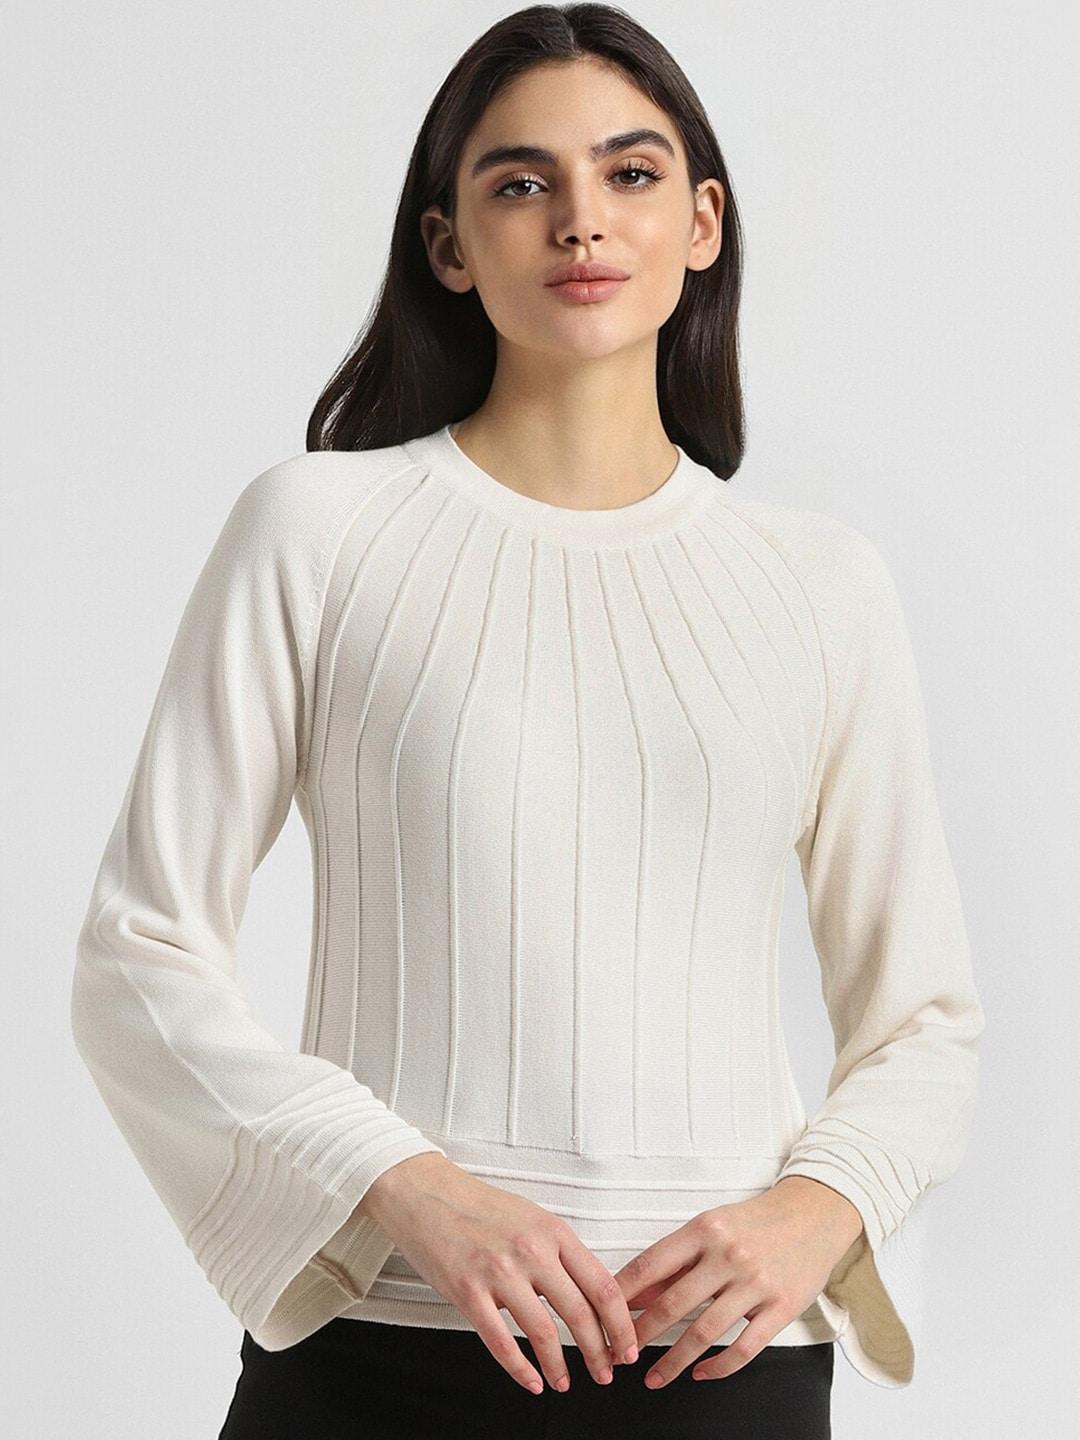 allen-solly-woman-long-sleeves-casual-top